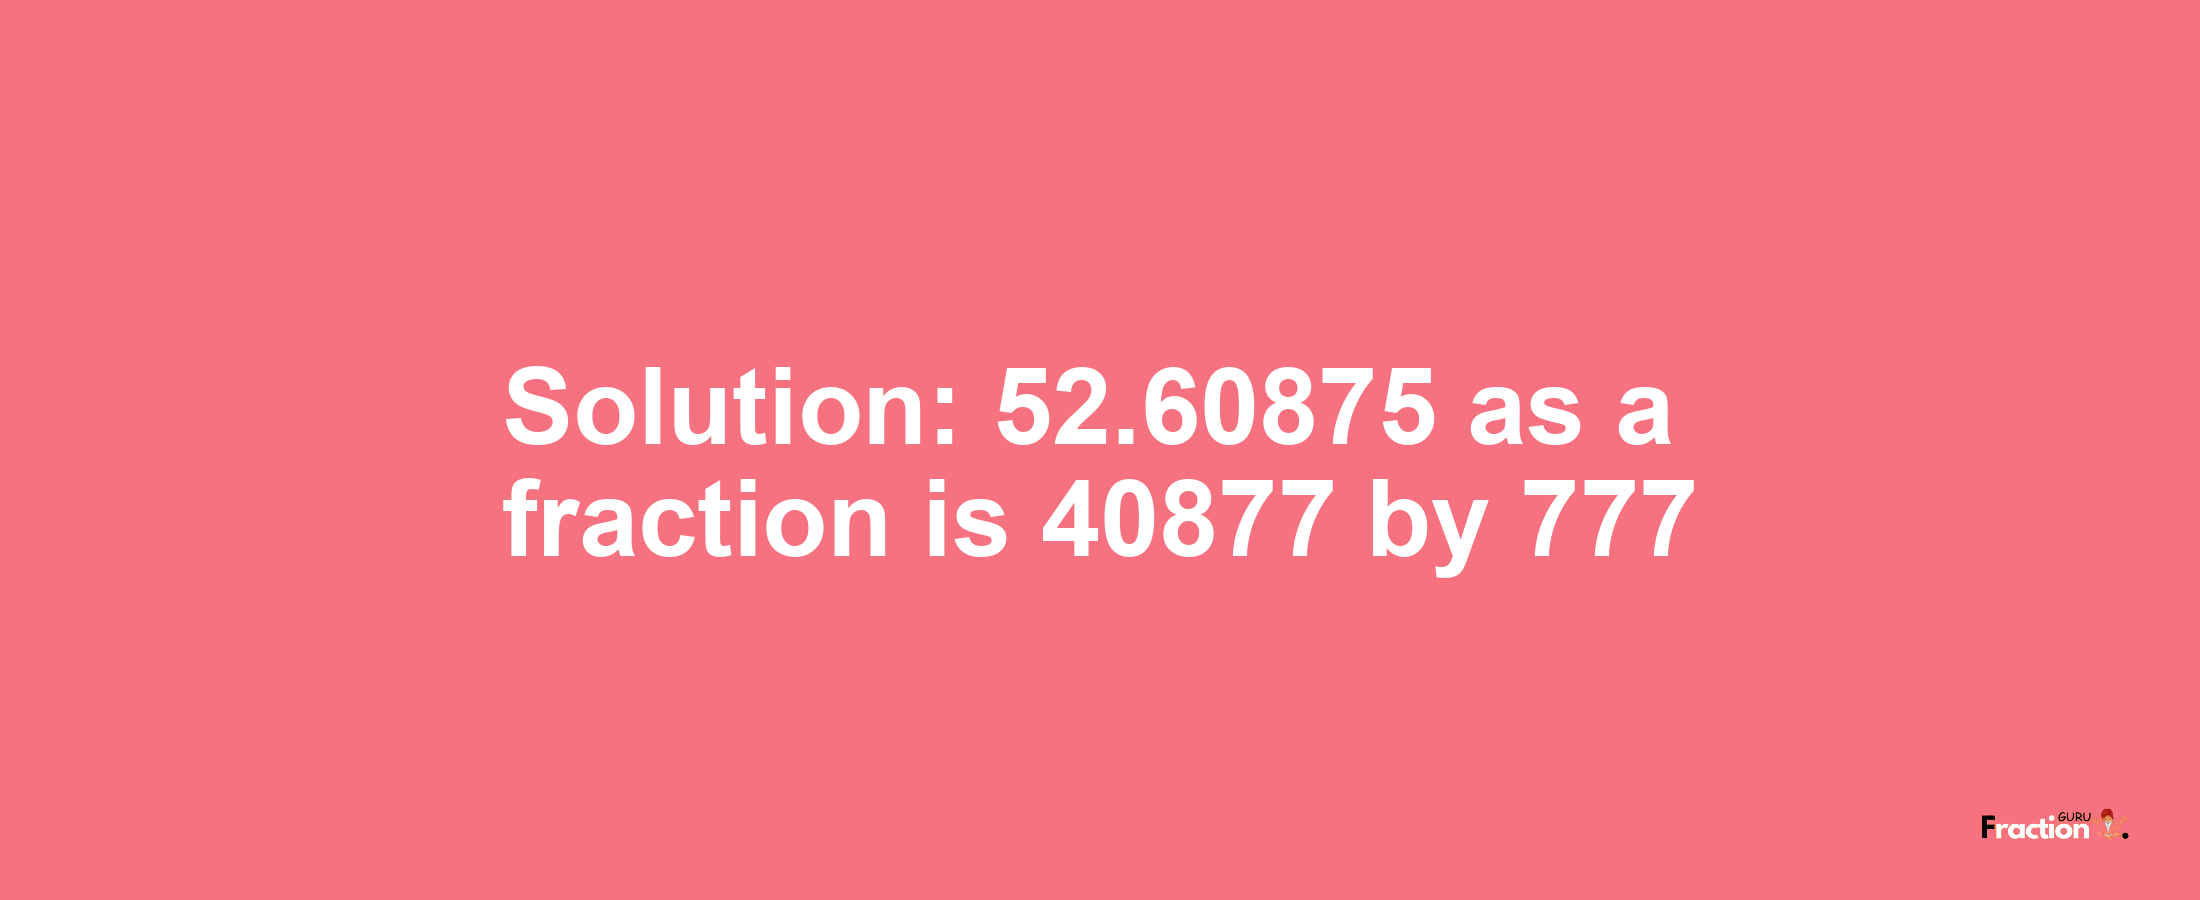 Solution:52.60875 as a fraction is 40877/777